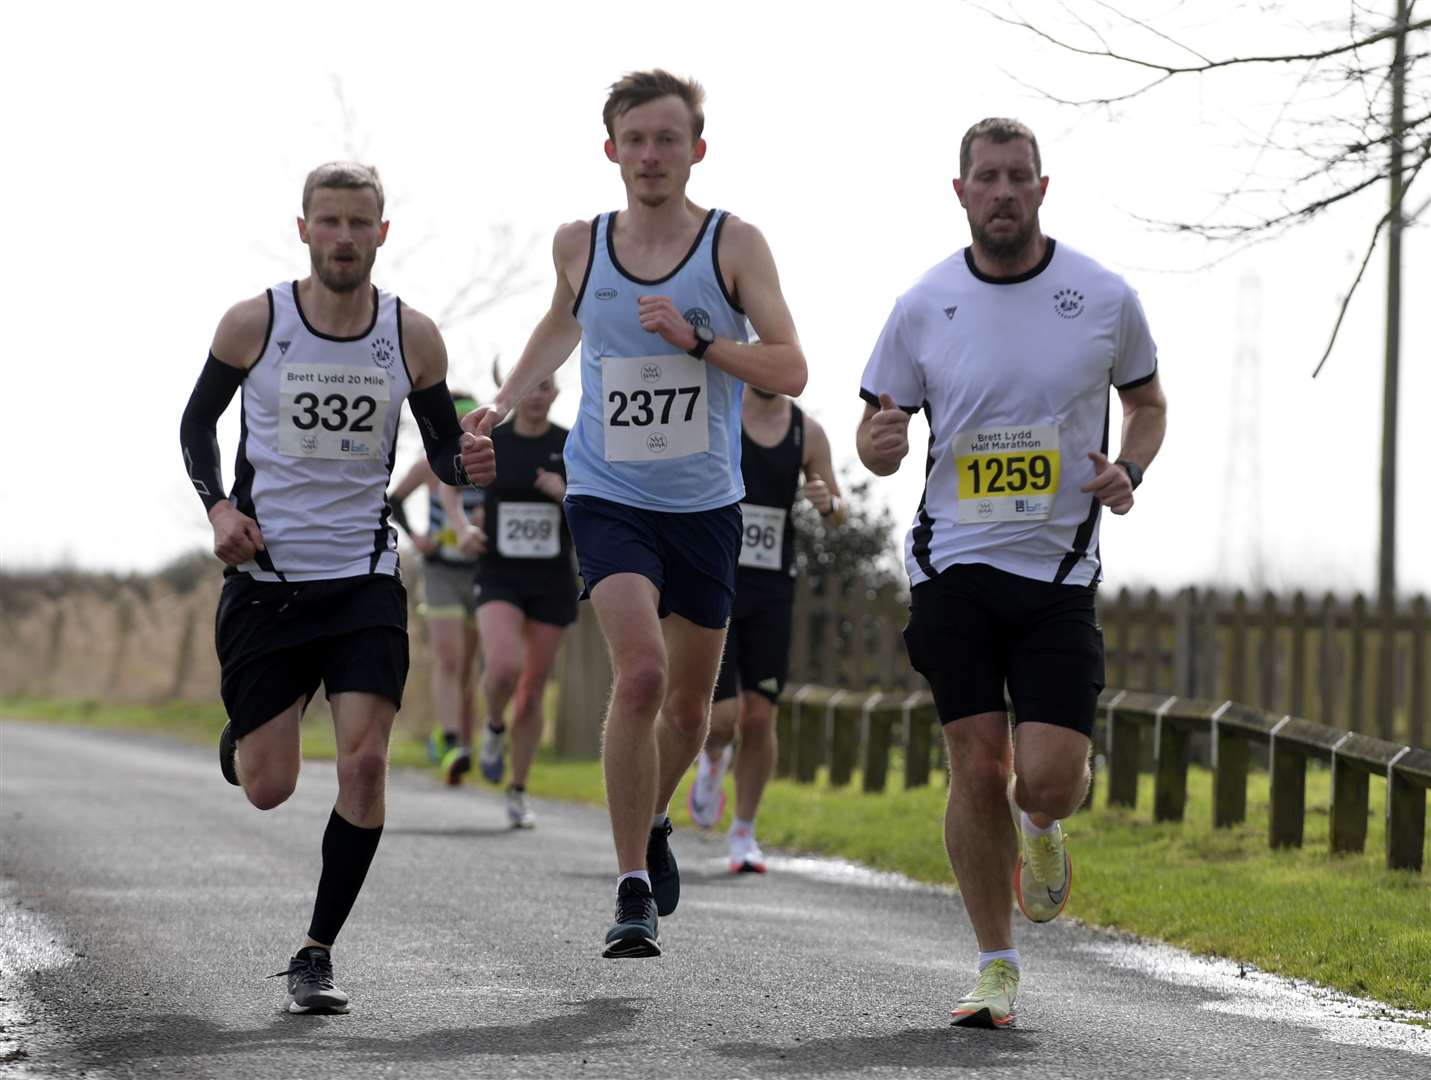 No.332 Jared Dobson of Dover Road Runners with No.2377 Ross May of Cambridge Harriers and No.1259 Philip Sluman, also of Dover Road Runners. Picture: Barry Goodwin (62961896)